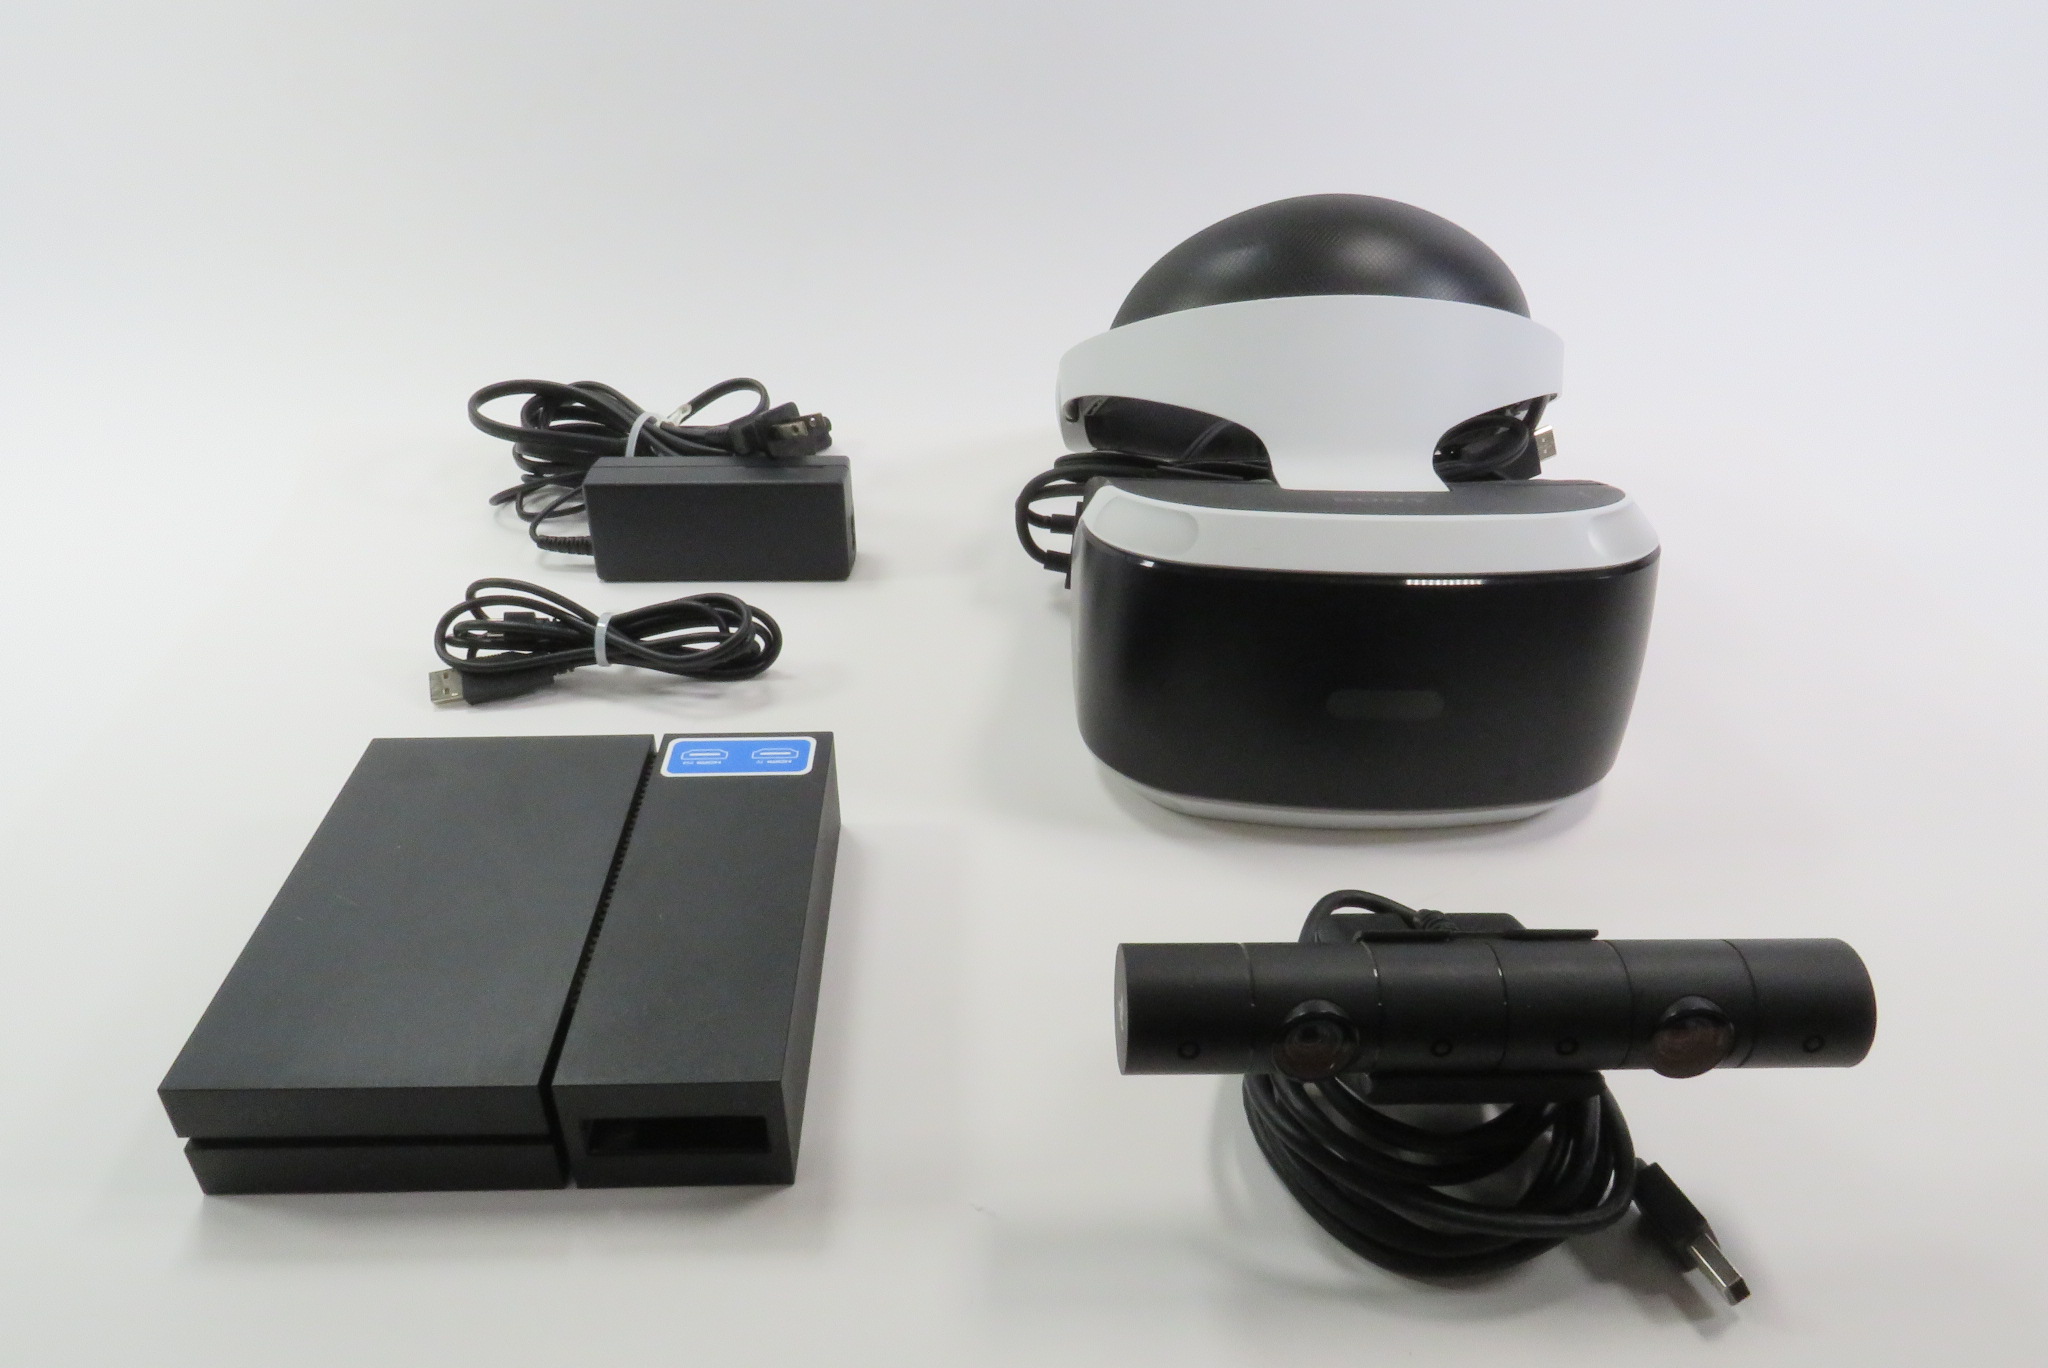  Sony PlayStation VR Virtual Reallity Gadget (PS4